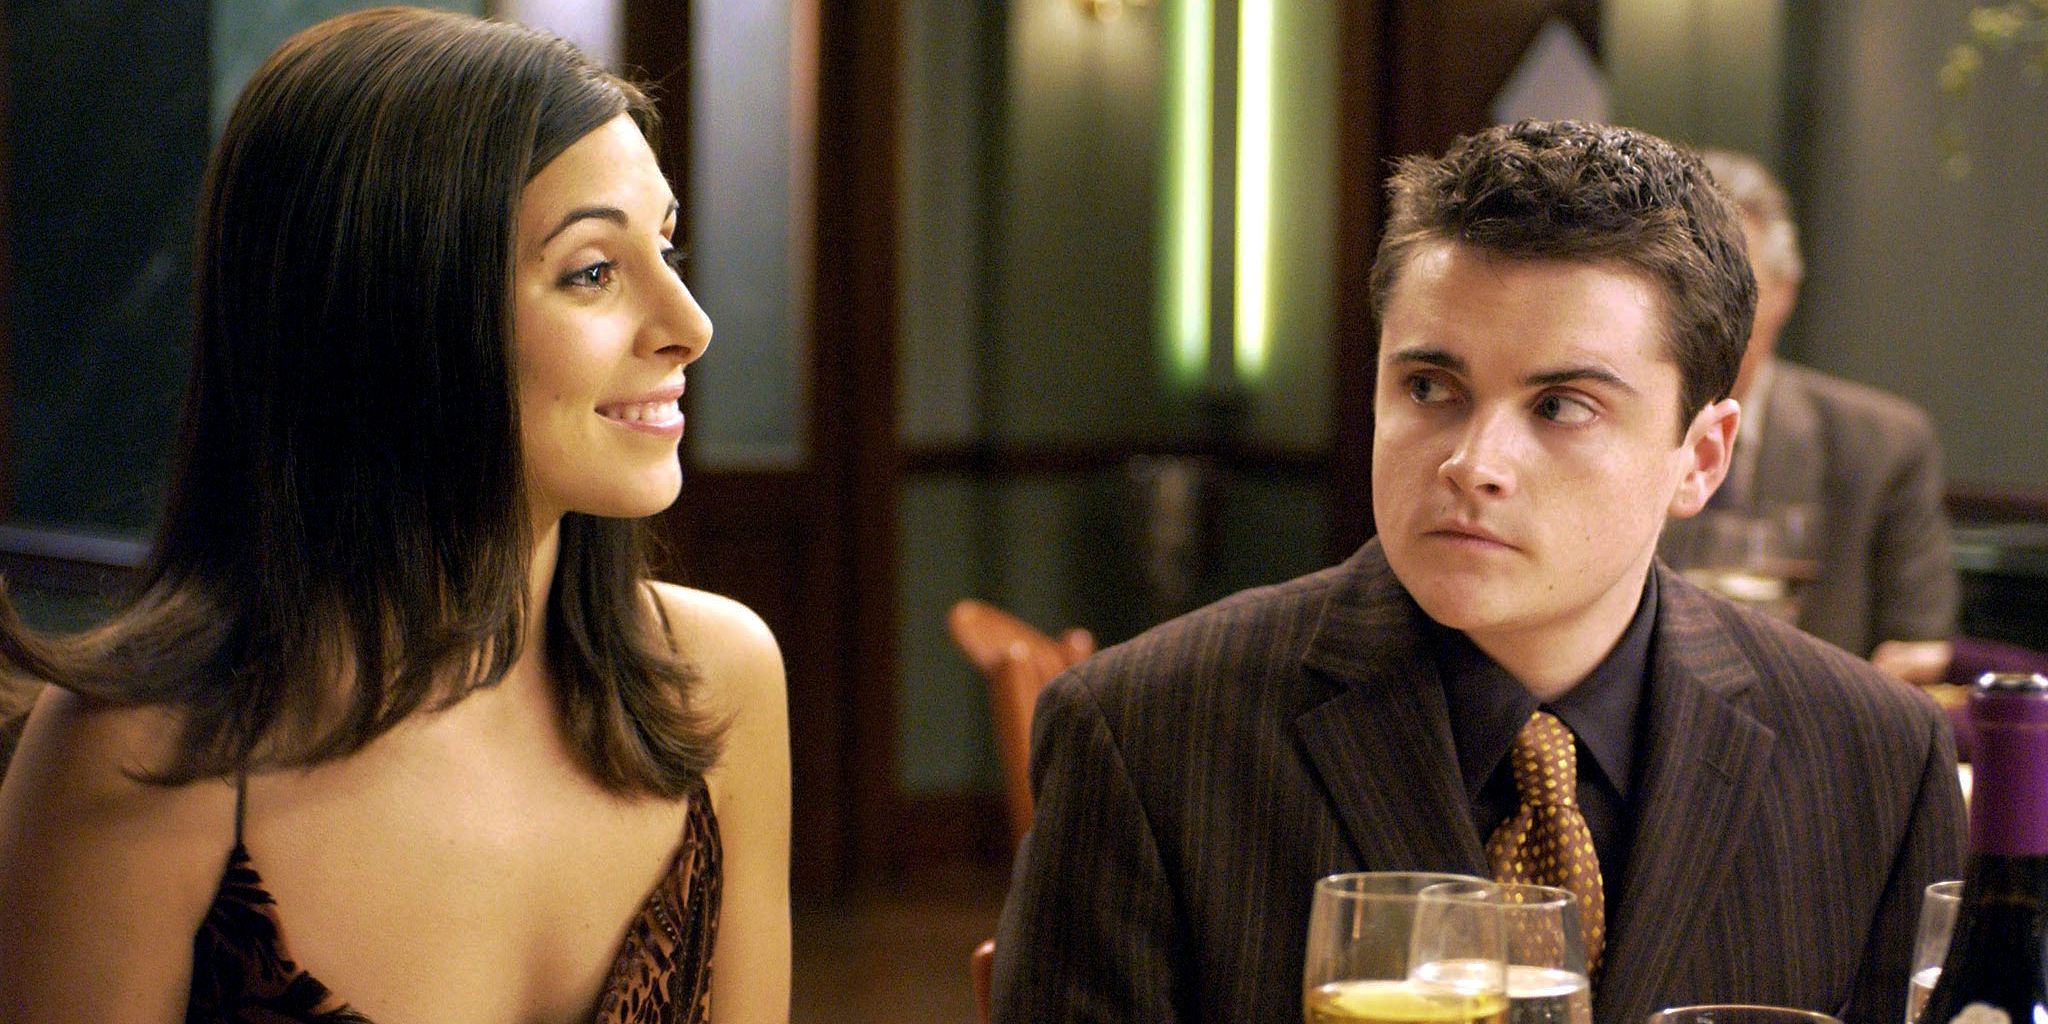 Jamie-Lynn Sigler and Robert Iler as Meadow and AJ in The Sopranos